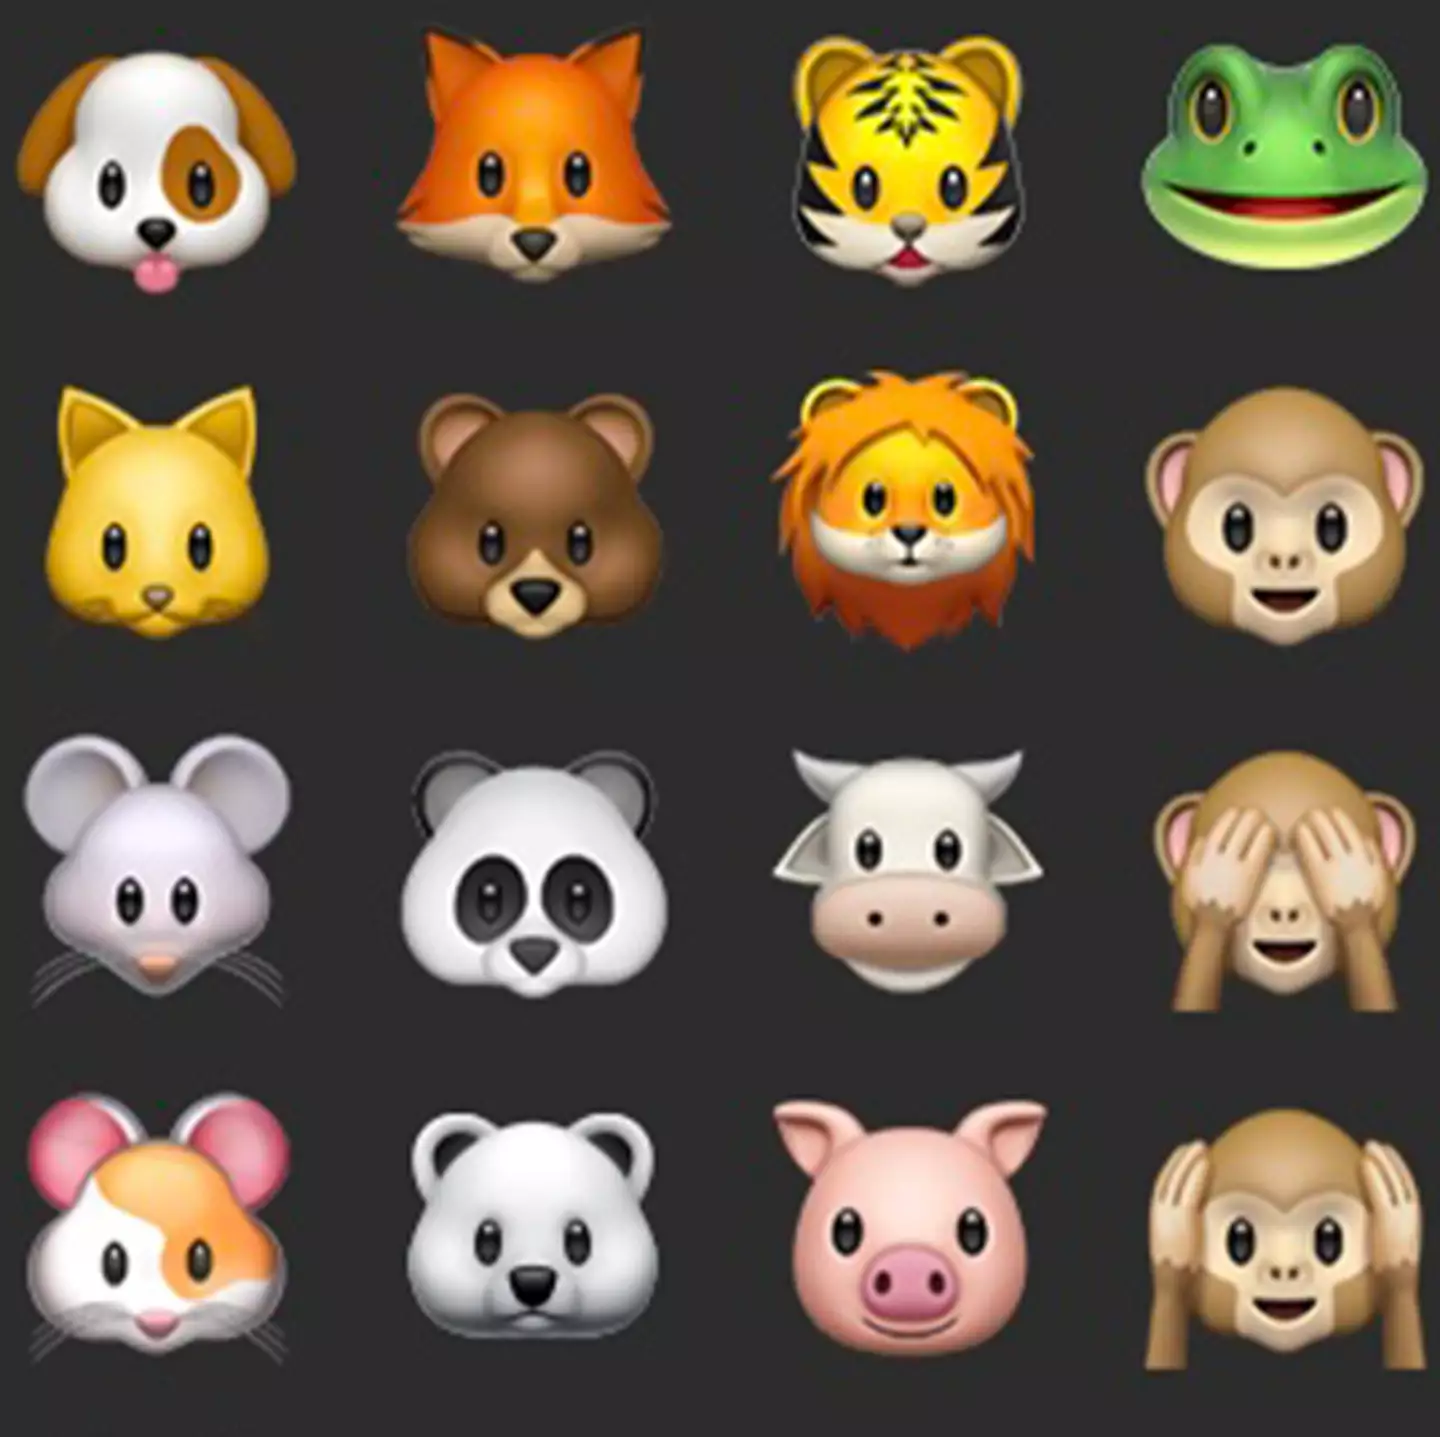 Scientists call for greater emoji biodiversity to raise awareness of conservation